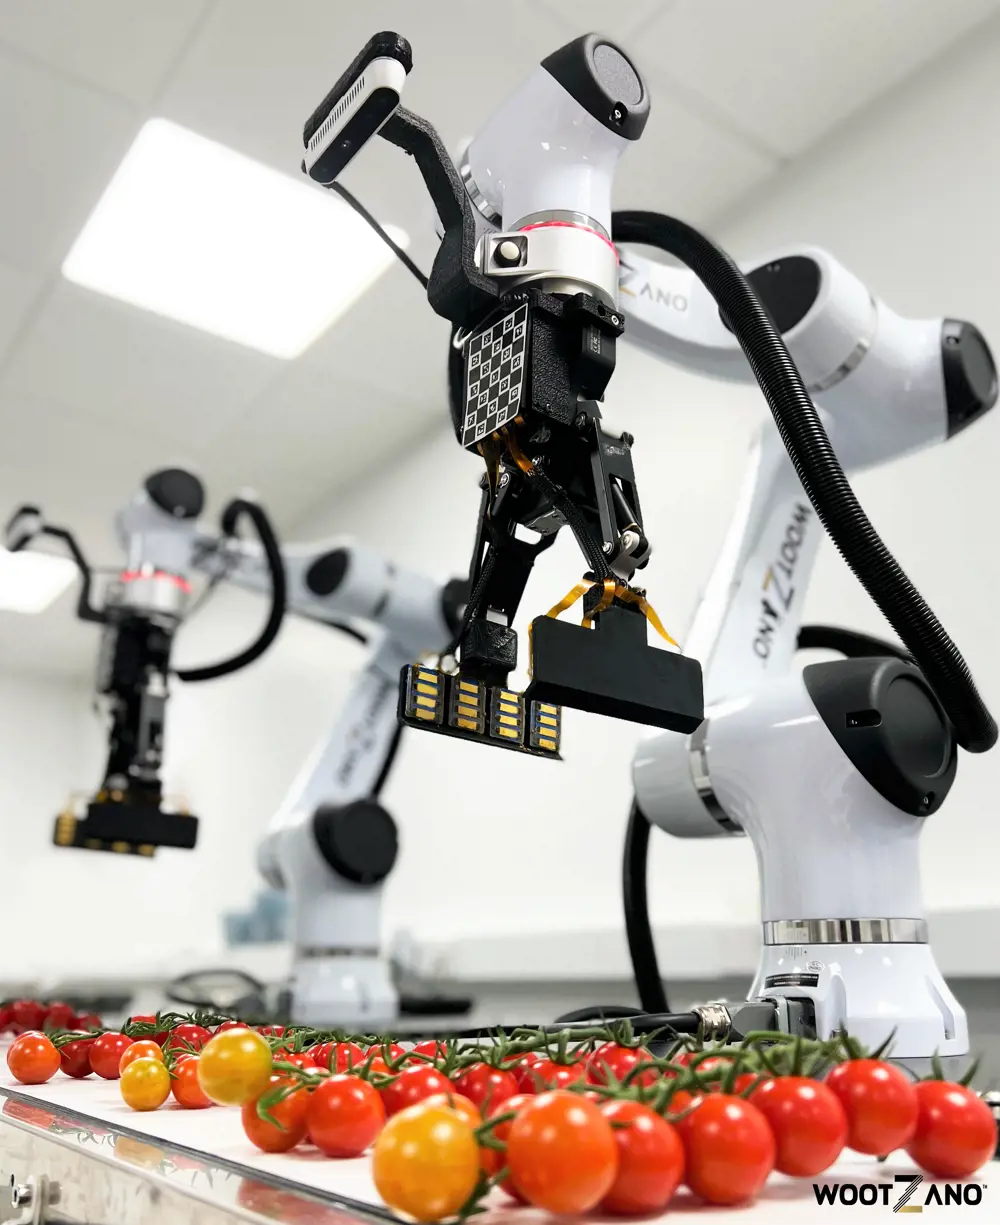 A white robotic arm is above tomatoes on the vine on a work surface, poised to pick them up for packaging 